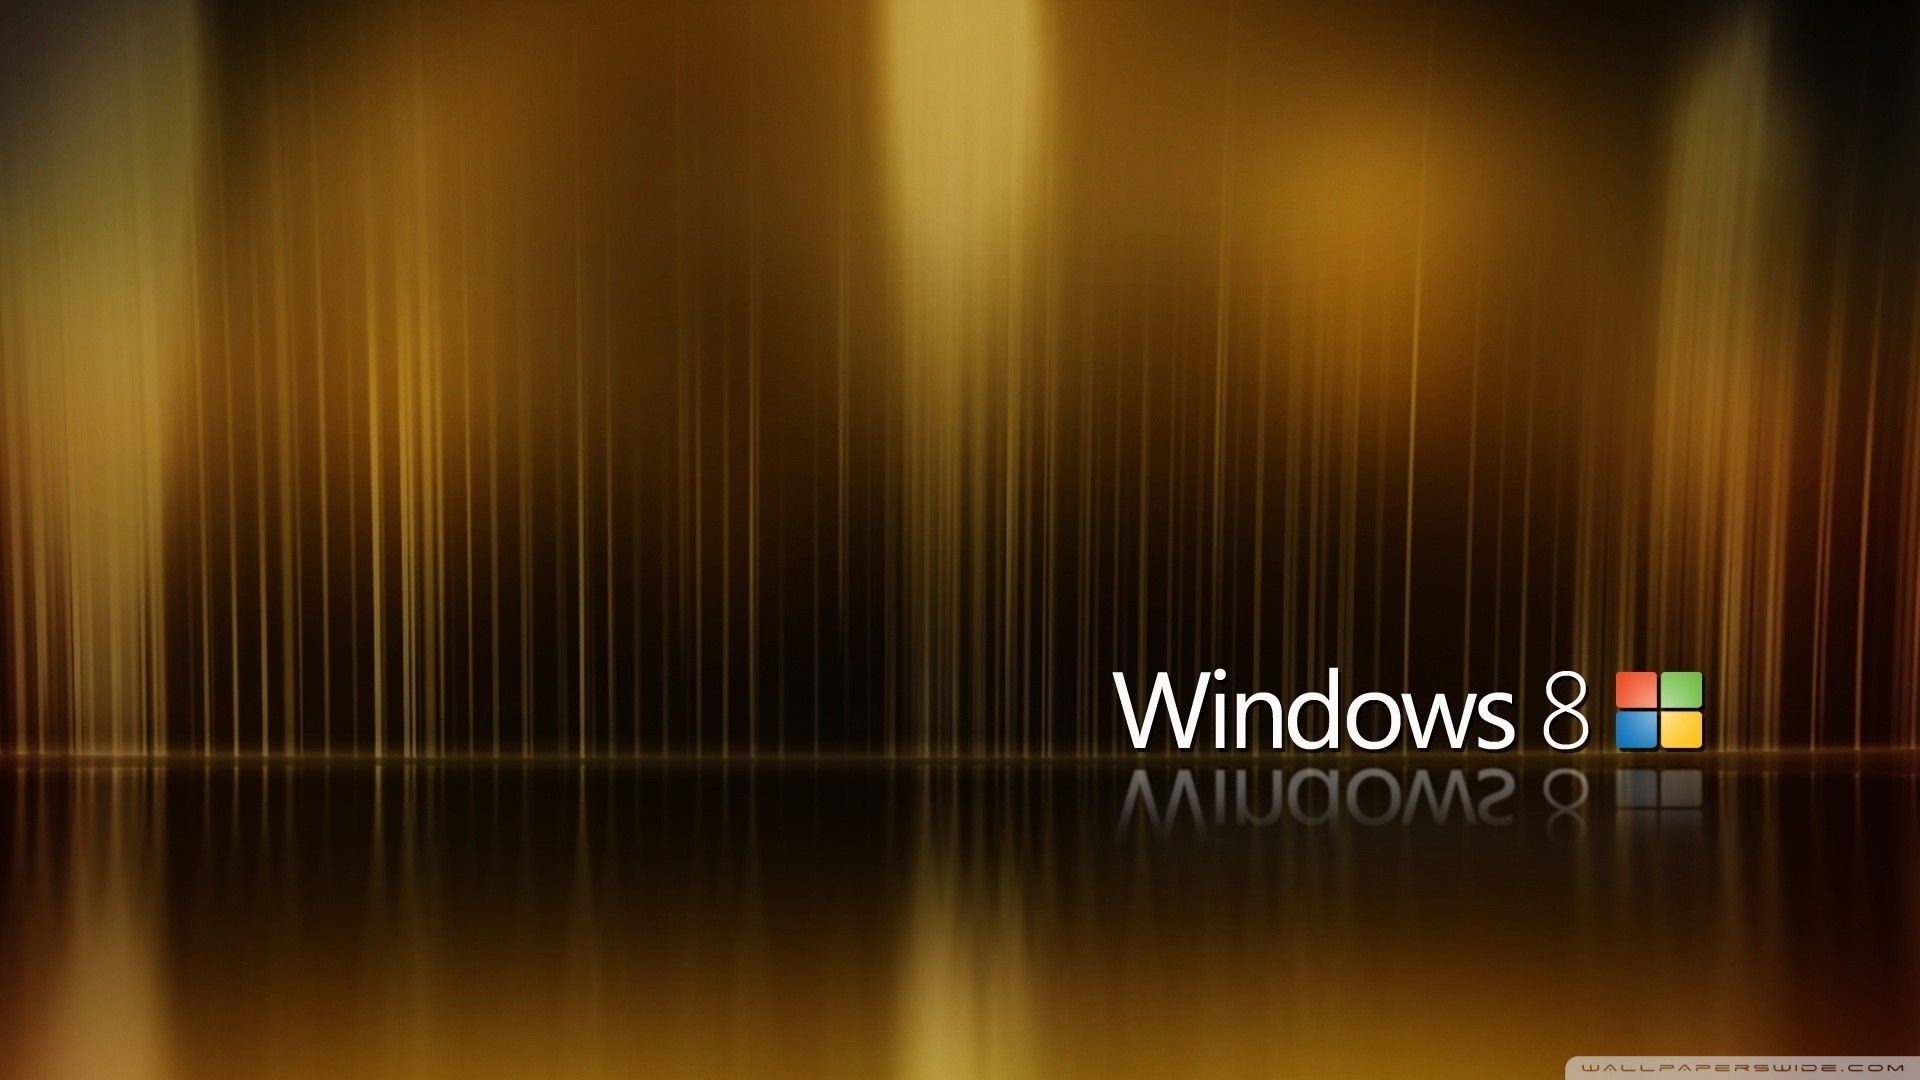 Windows 8 Wallpaper HD (81+ pictures)